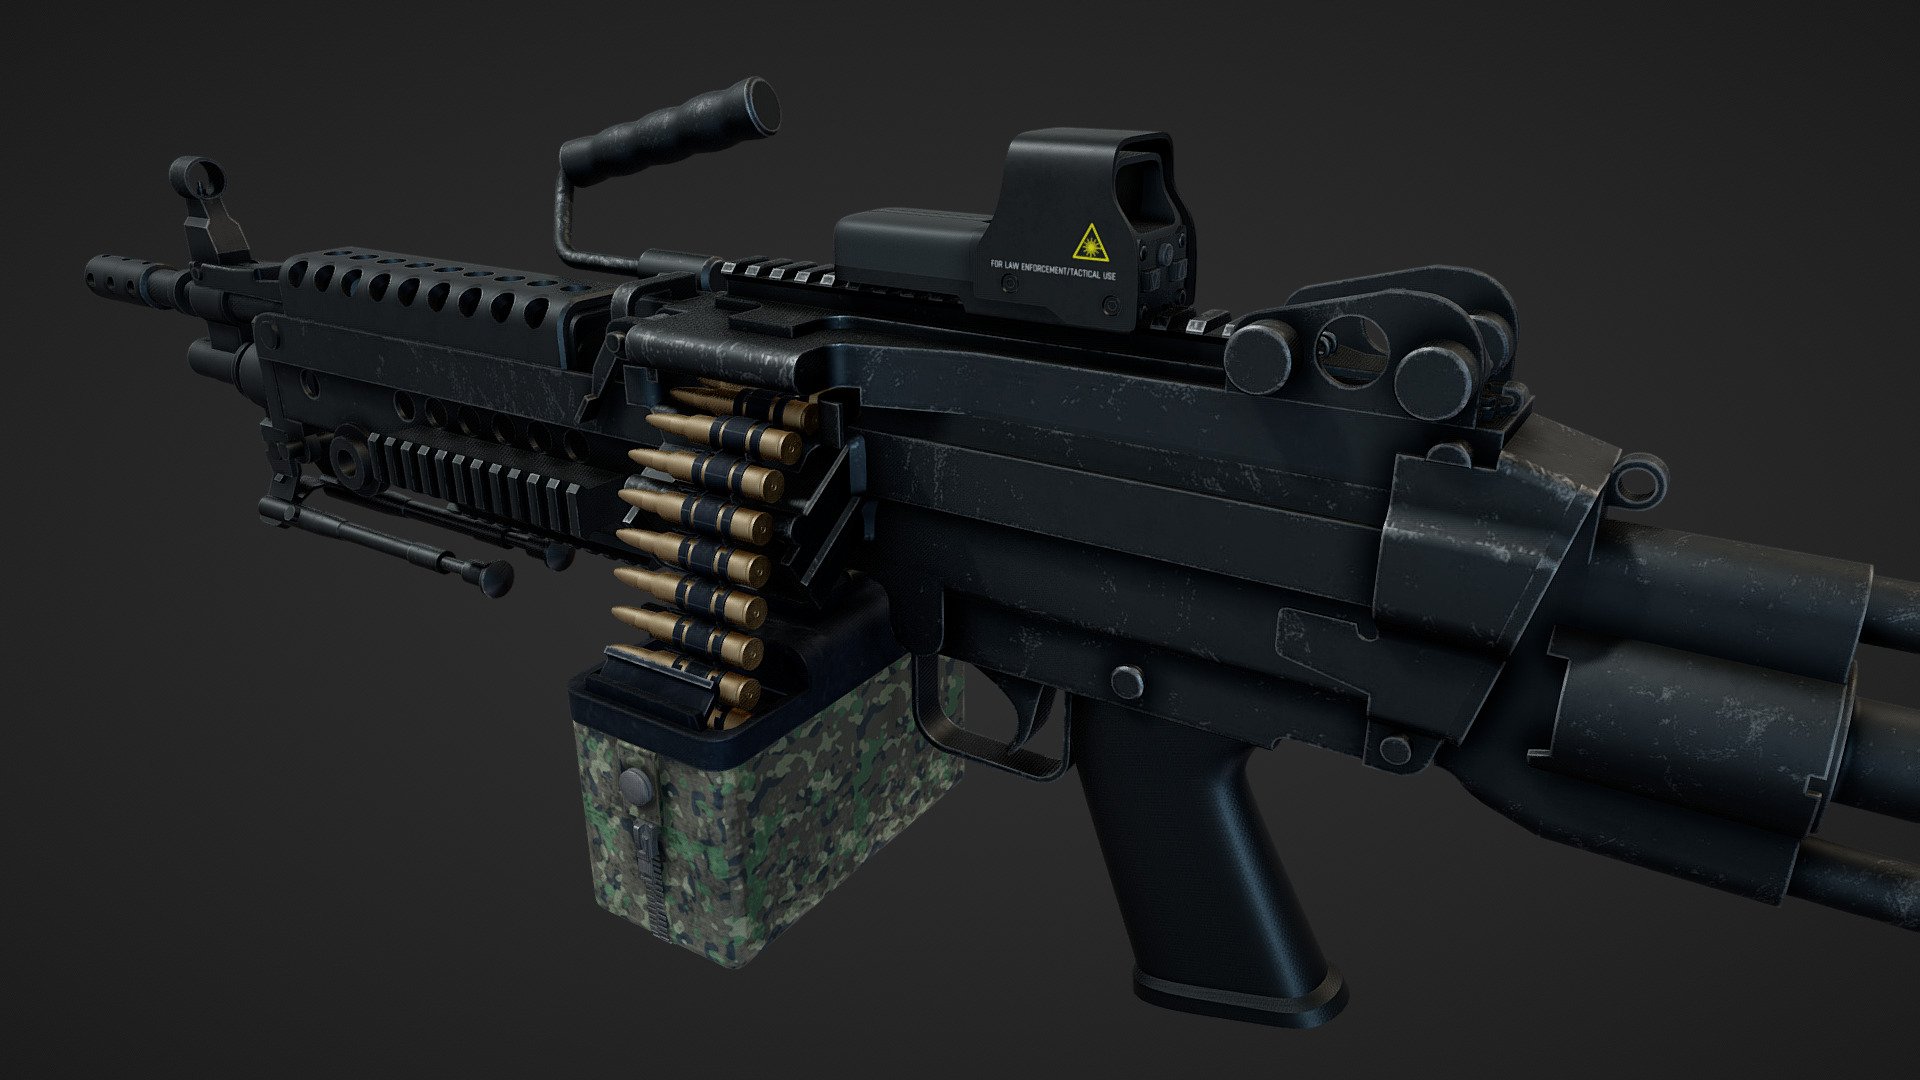 The M249 light machine gun (LMG), also known as the M249 Squad Automatic Weapon (SAW), which continues to be the manufacturer's designation, and formally written as Light Machine Gun, 5.56 mm, M249, is the American adaptation of the Belgian FN Minimi, a light machine gun manufactured by the Belgian company FN Herstal (FN) 3d model